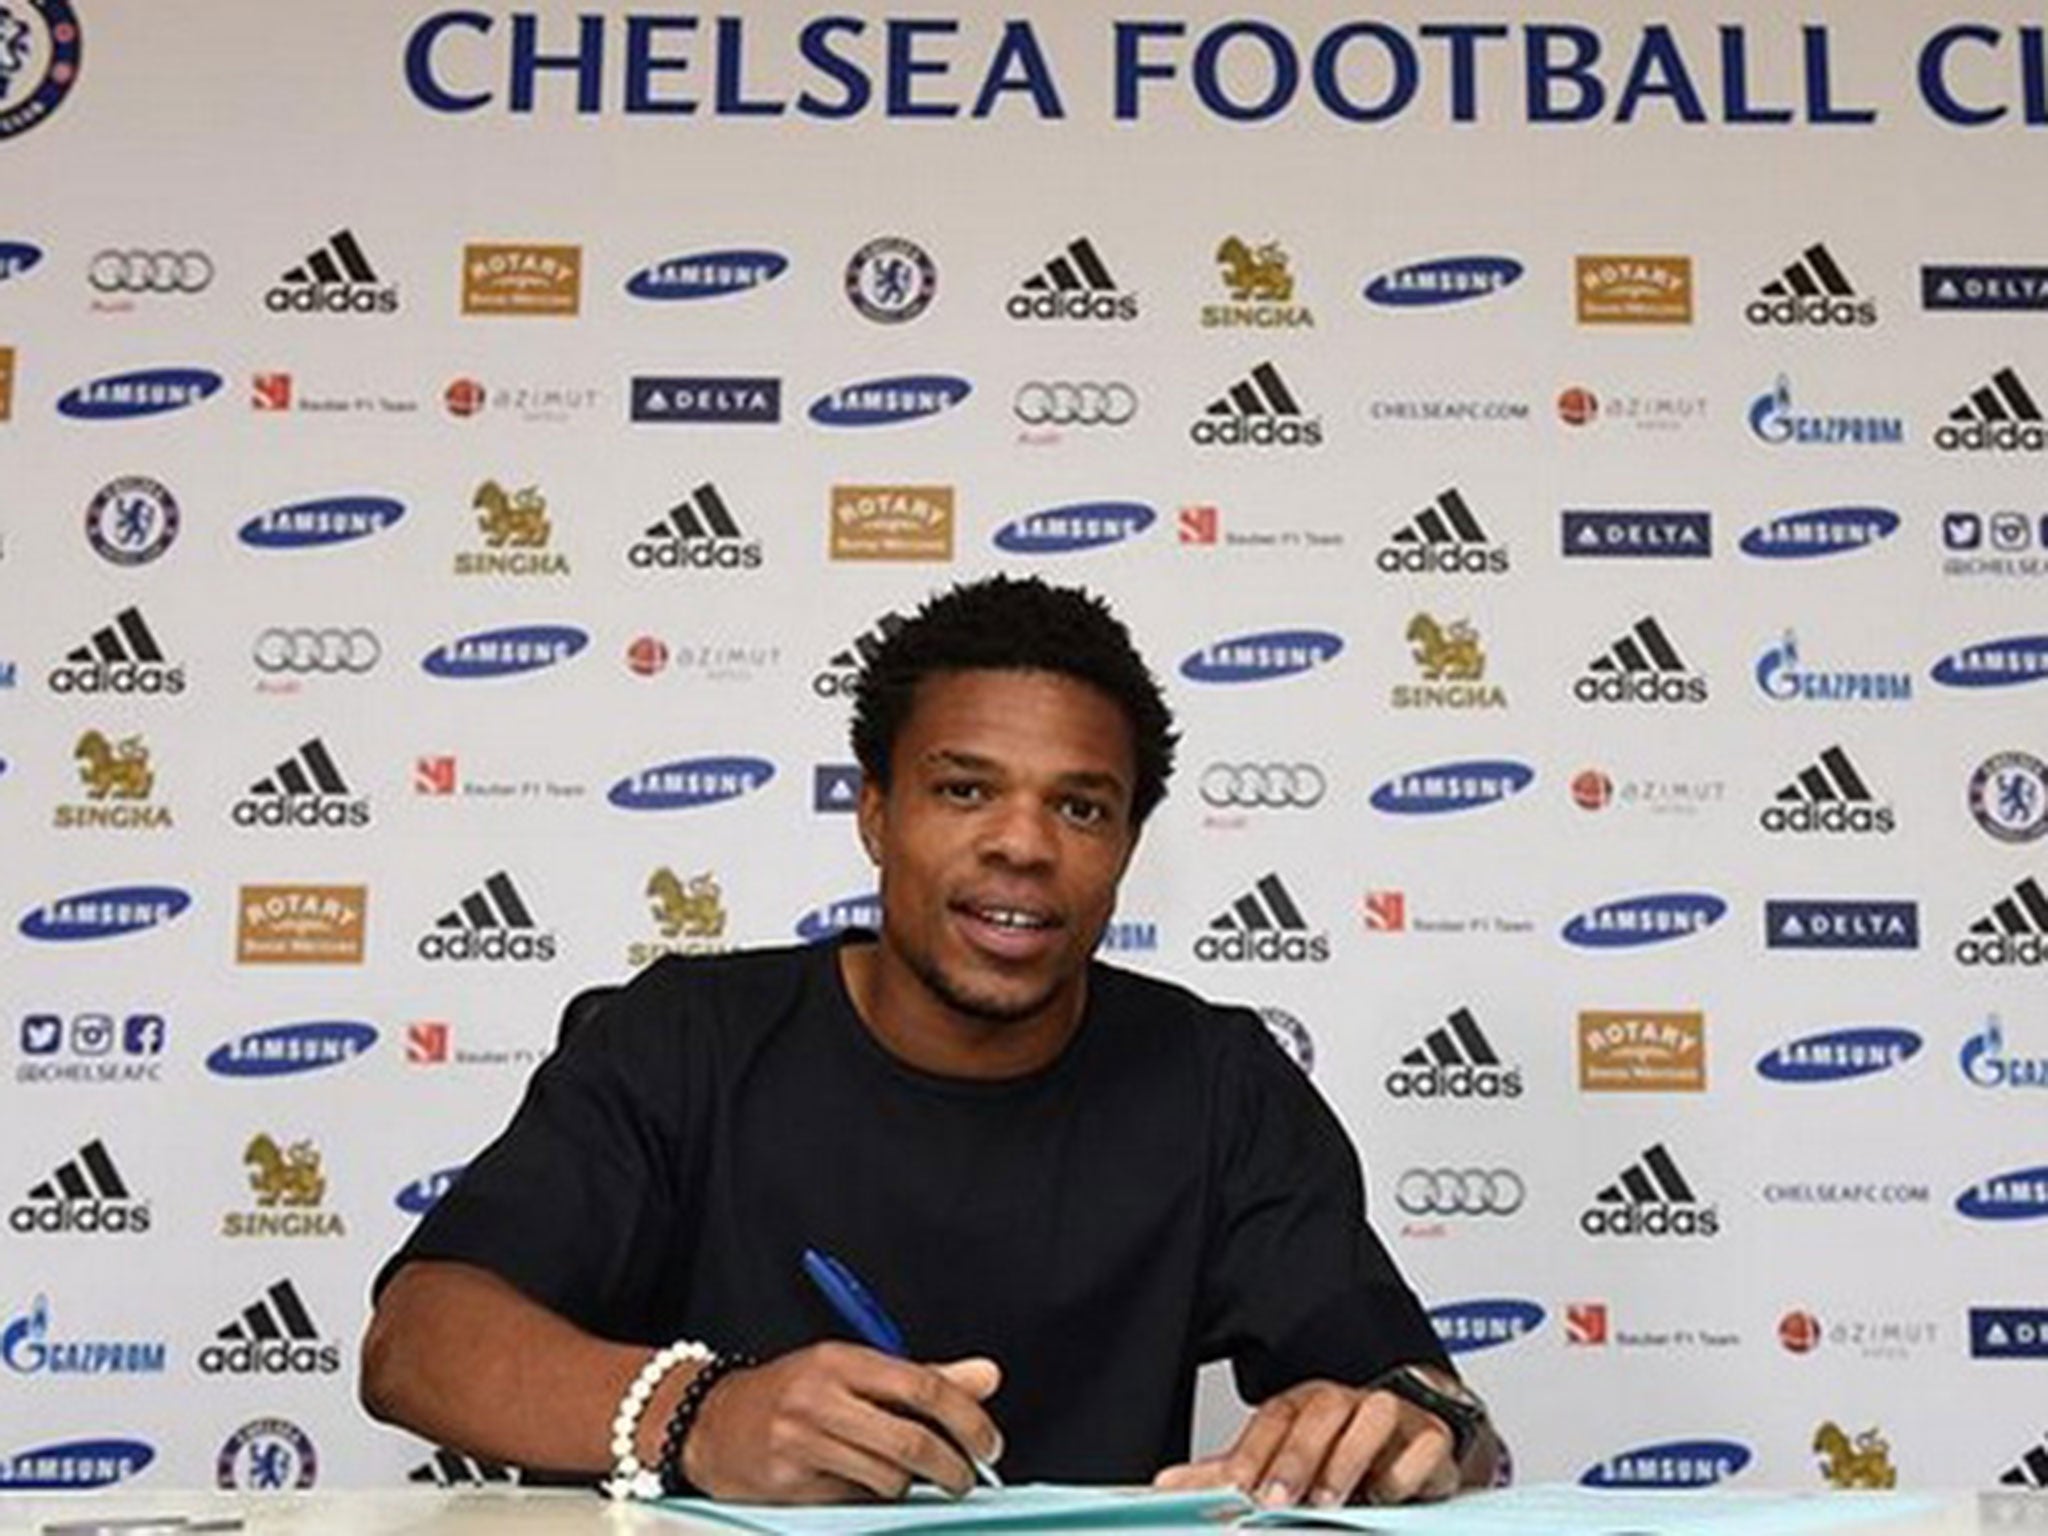 Loic Remy signs for Chelsea